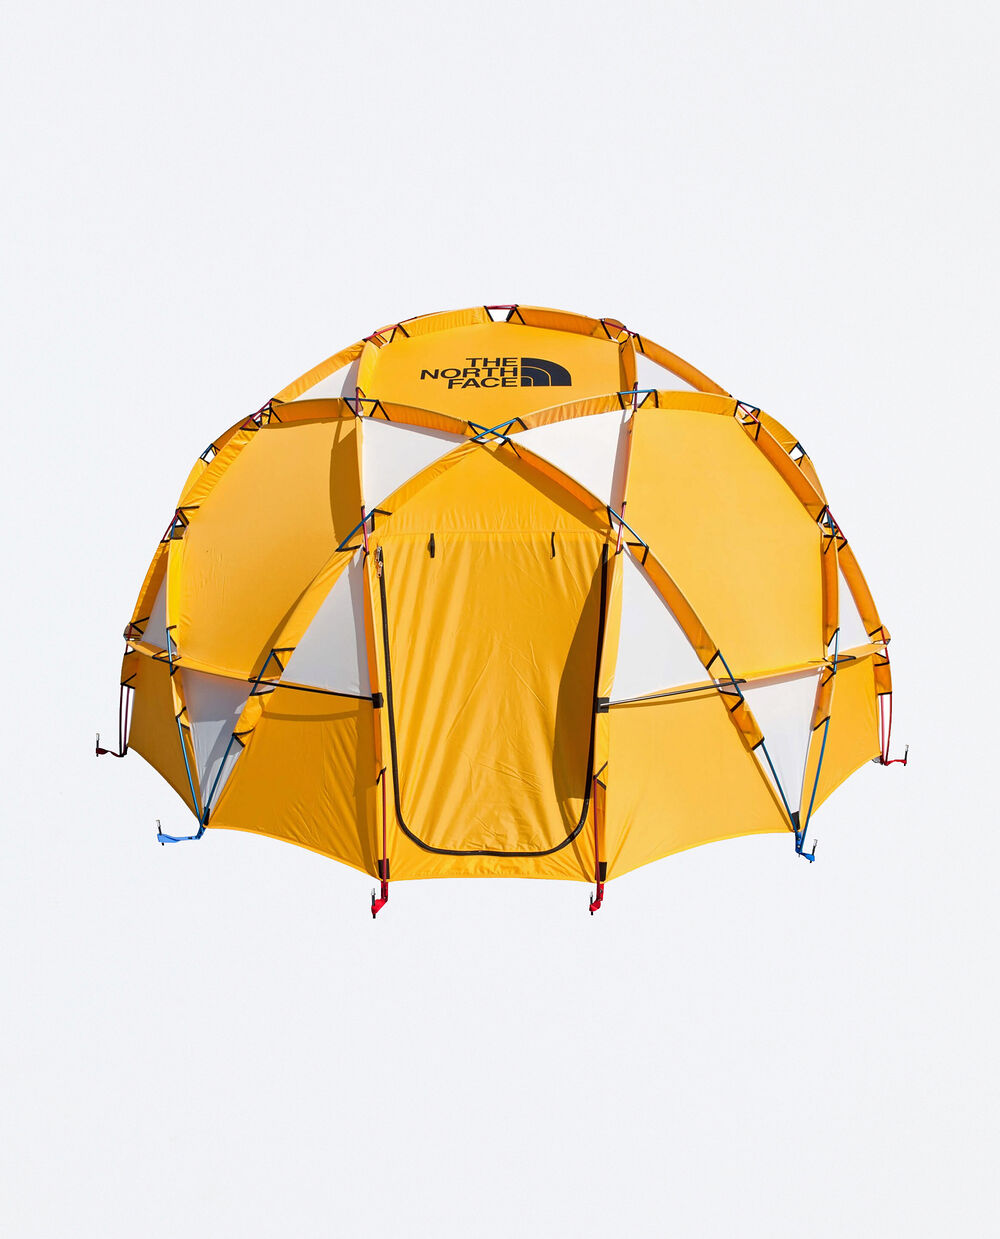 THE NORTH FACE SUMMIT SERIES 2 METRE DOME TENT